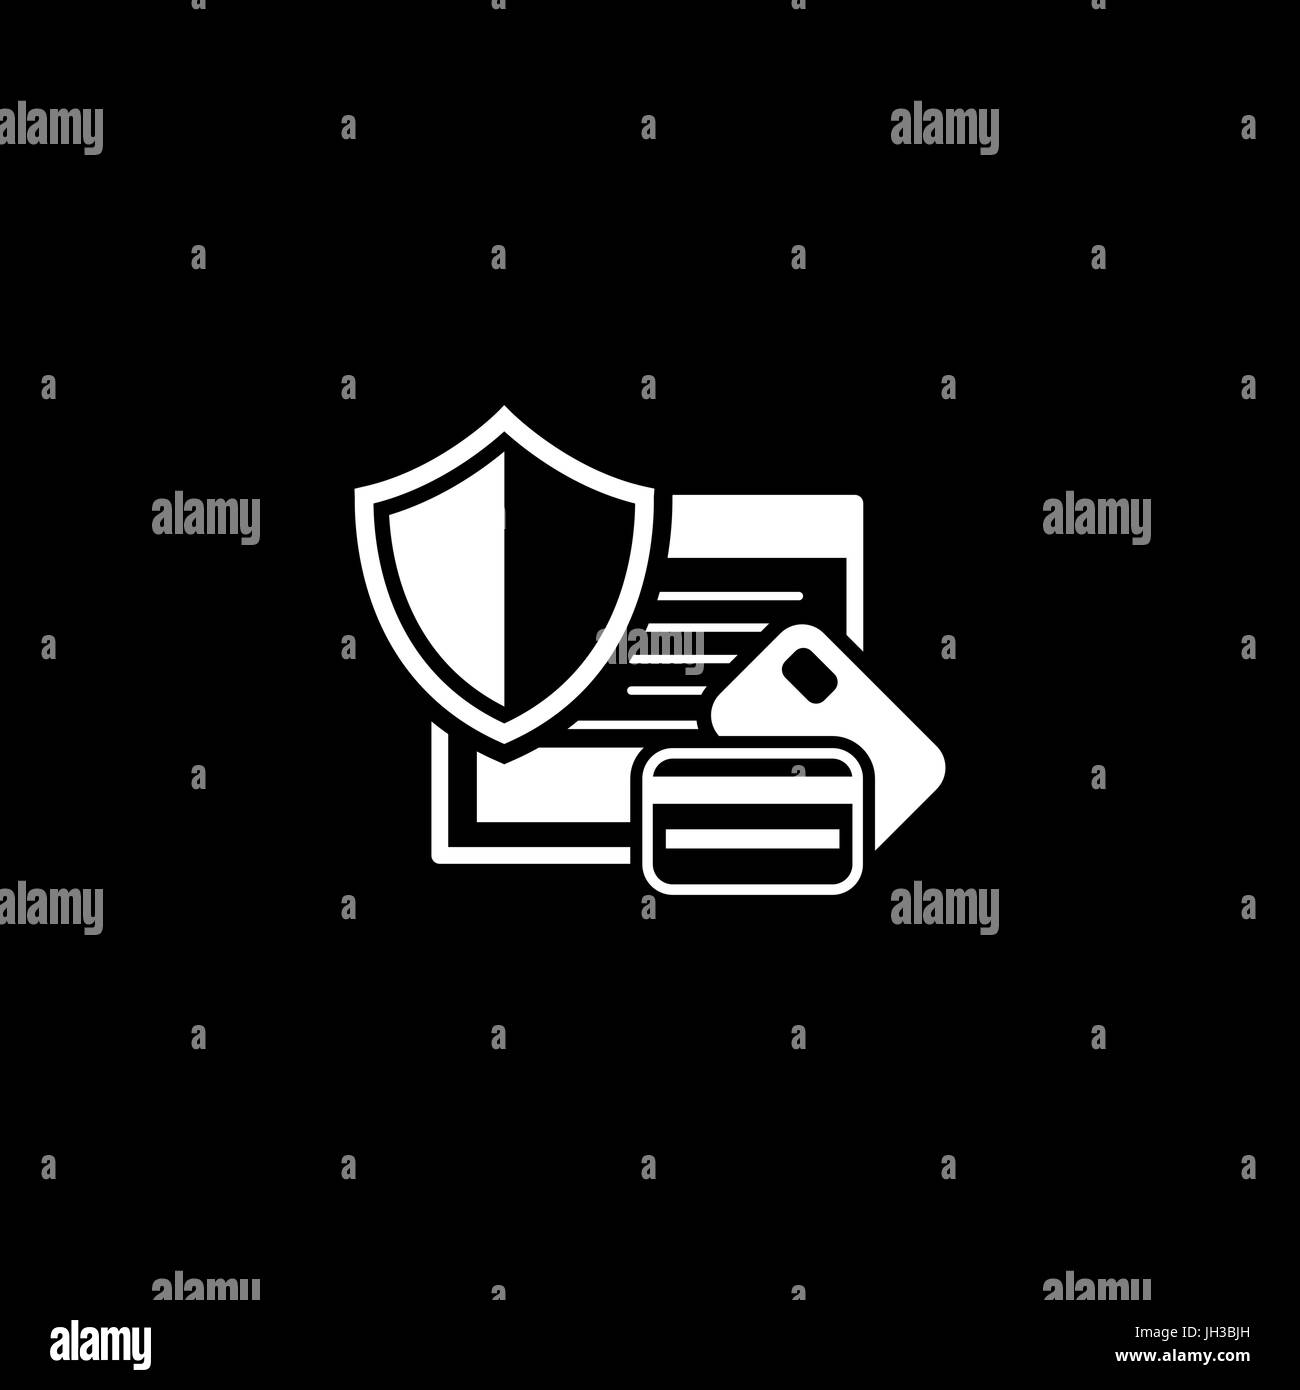 Secure Transaction Icon. Flat Design. Stock Vector